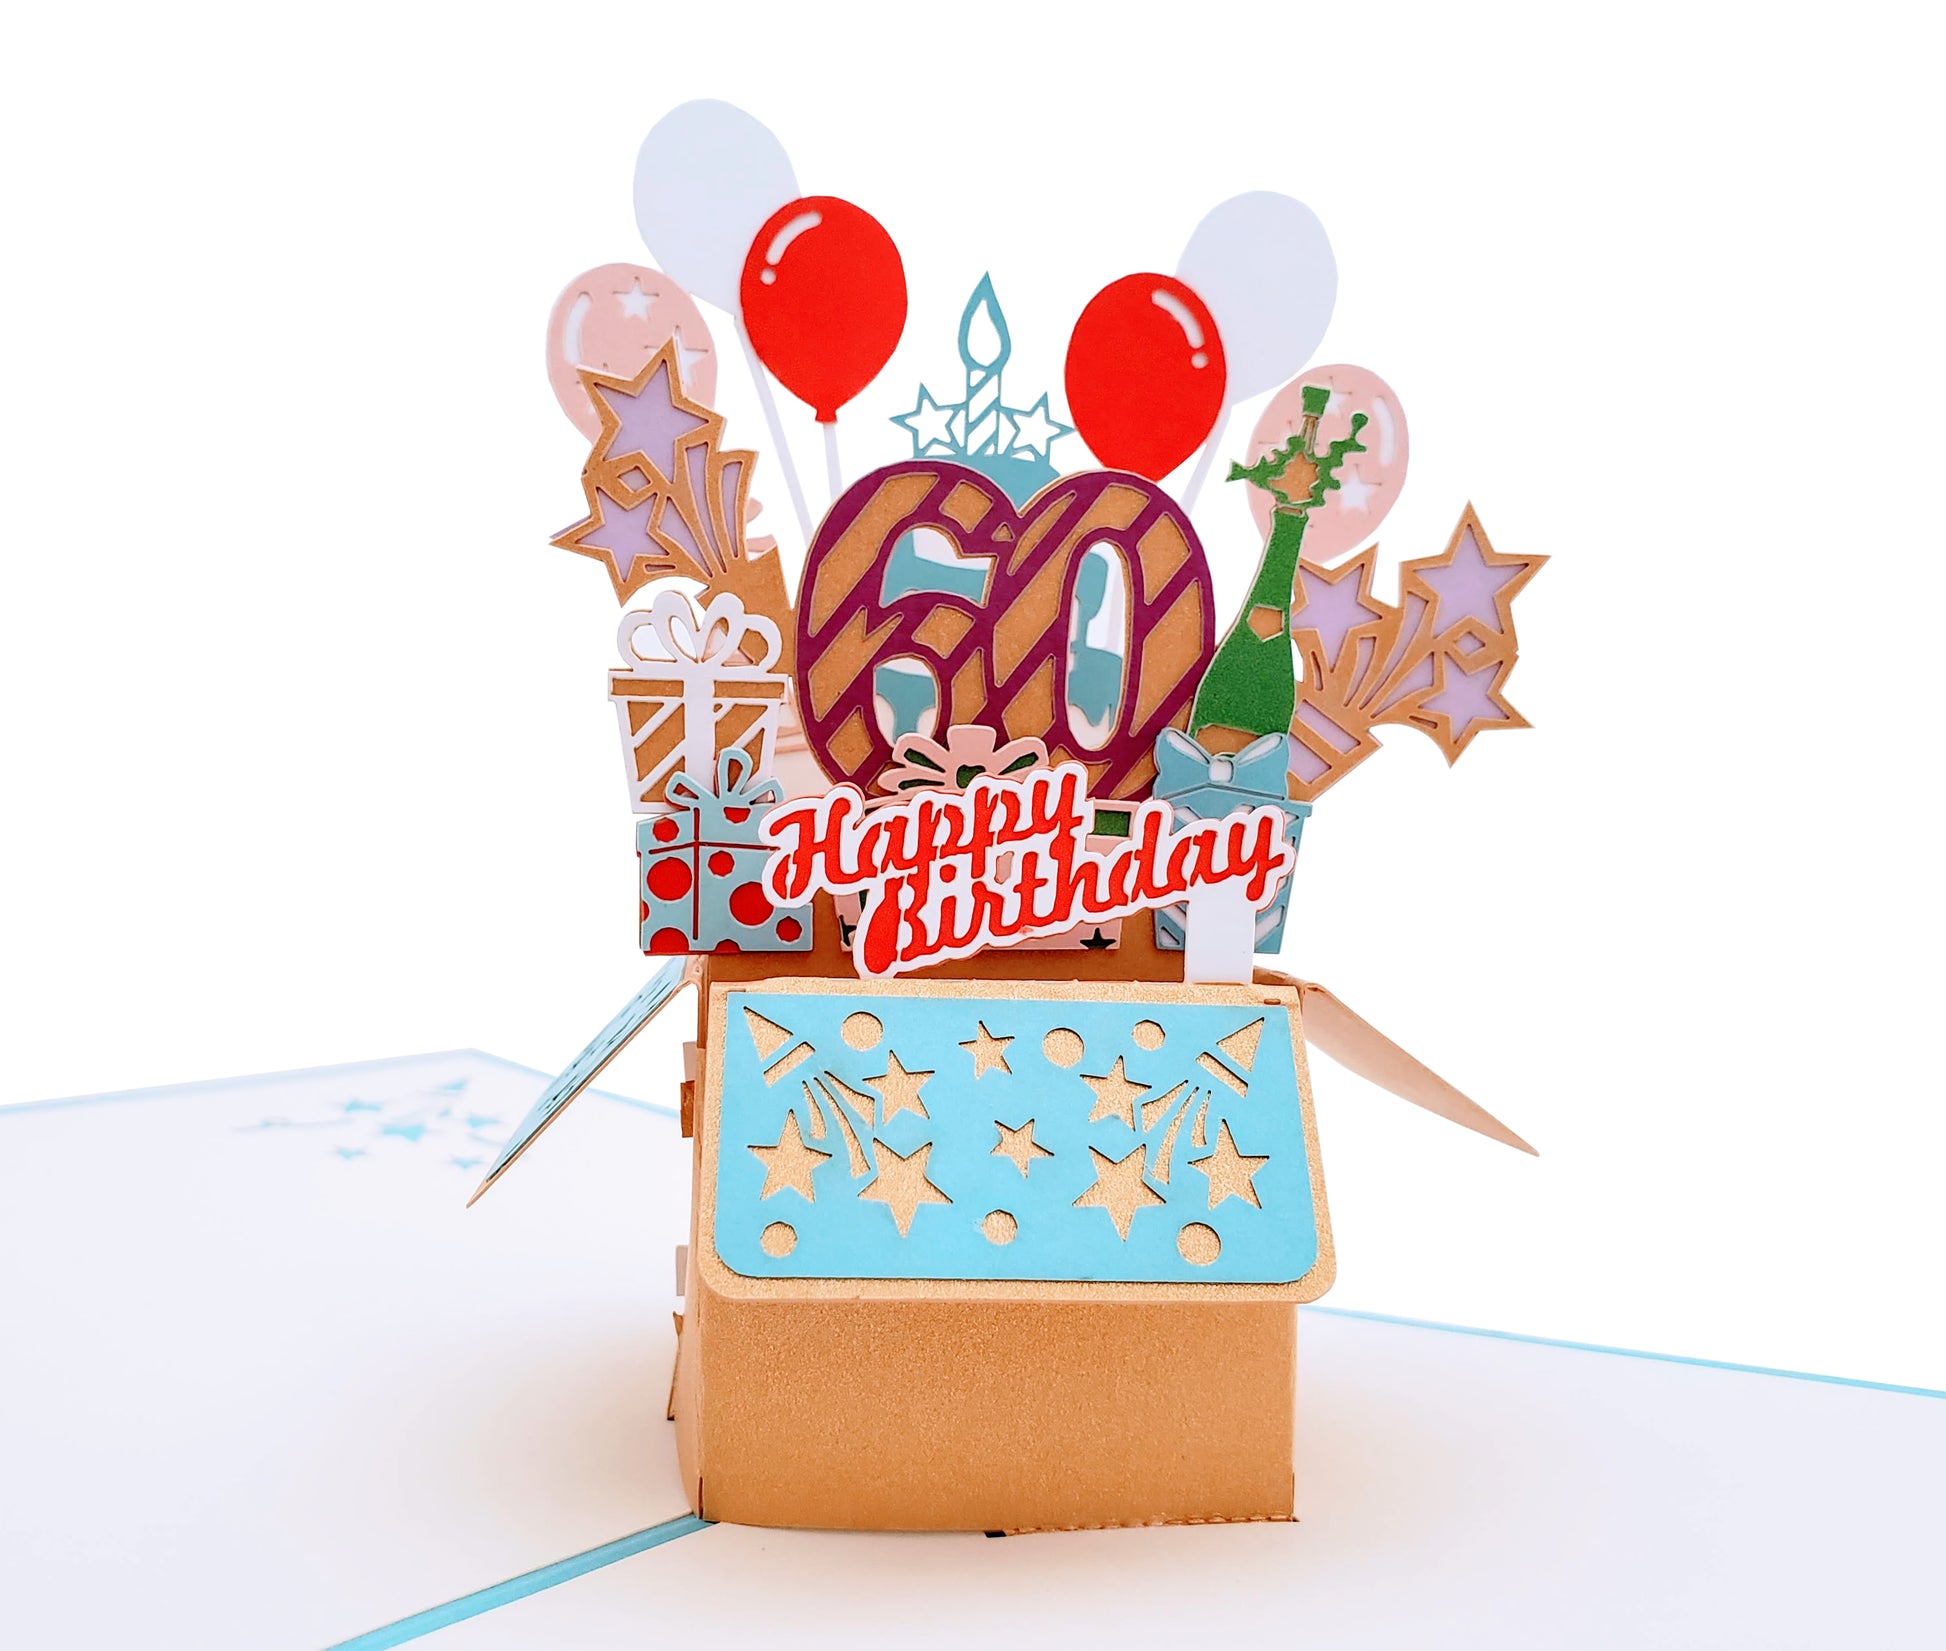 Happy 60th Birthday Blue Party Box 3D Pop Up Greeting Card - Age - Birthday - Fun - Special Days - iGifts And Cards